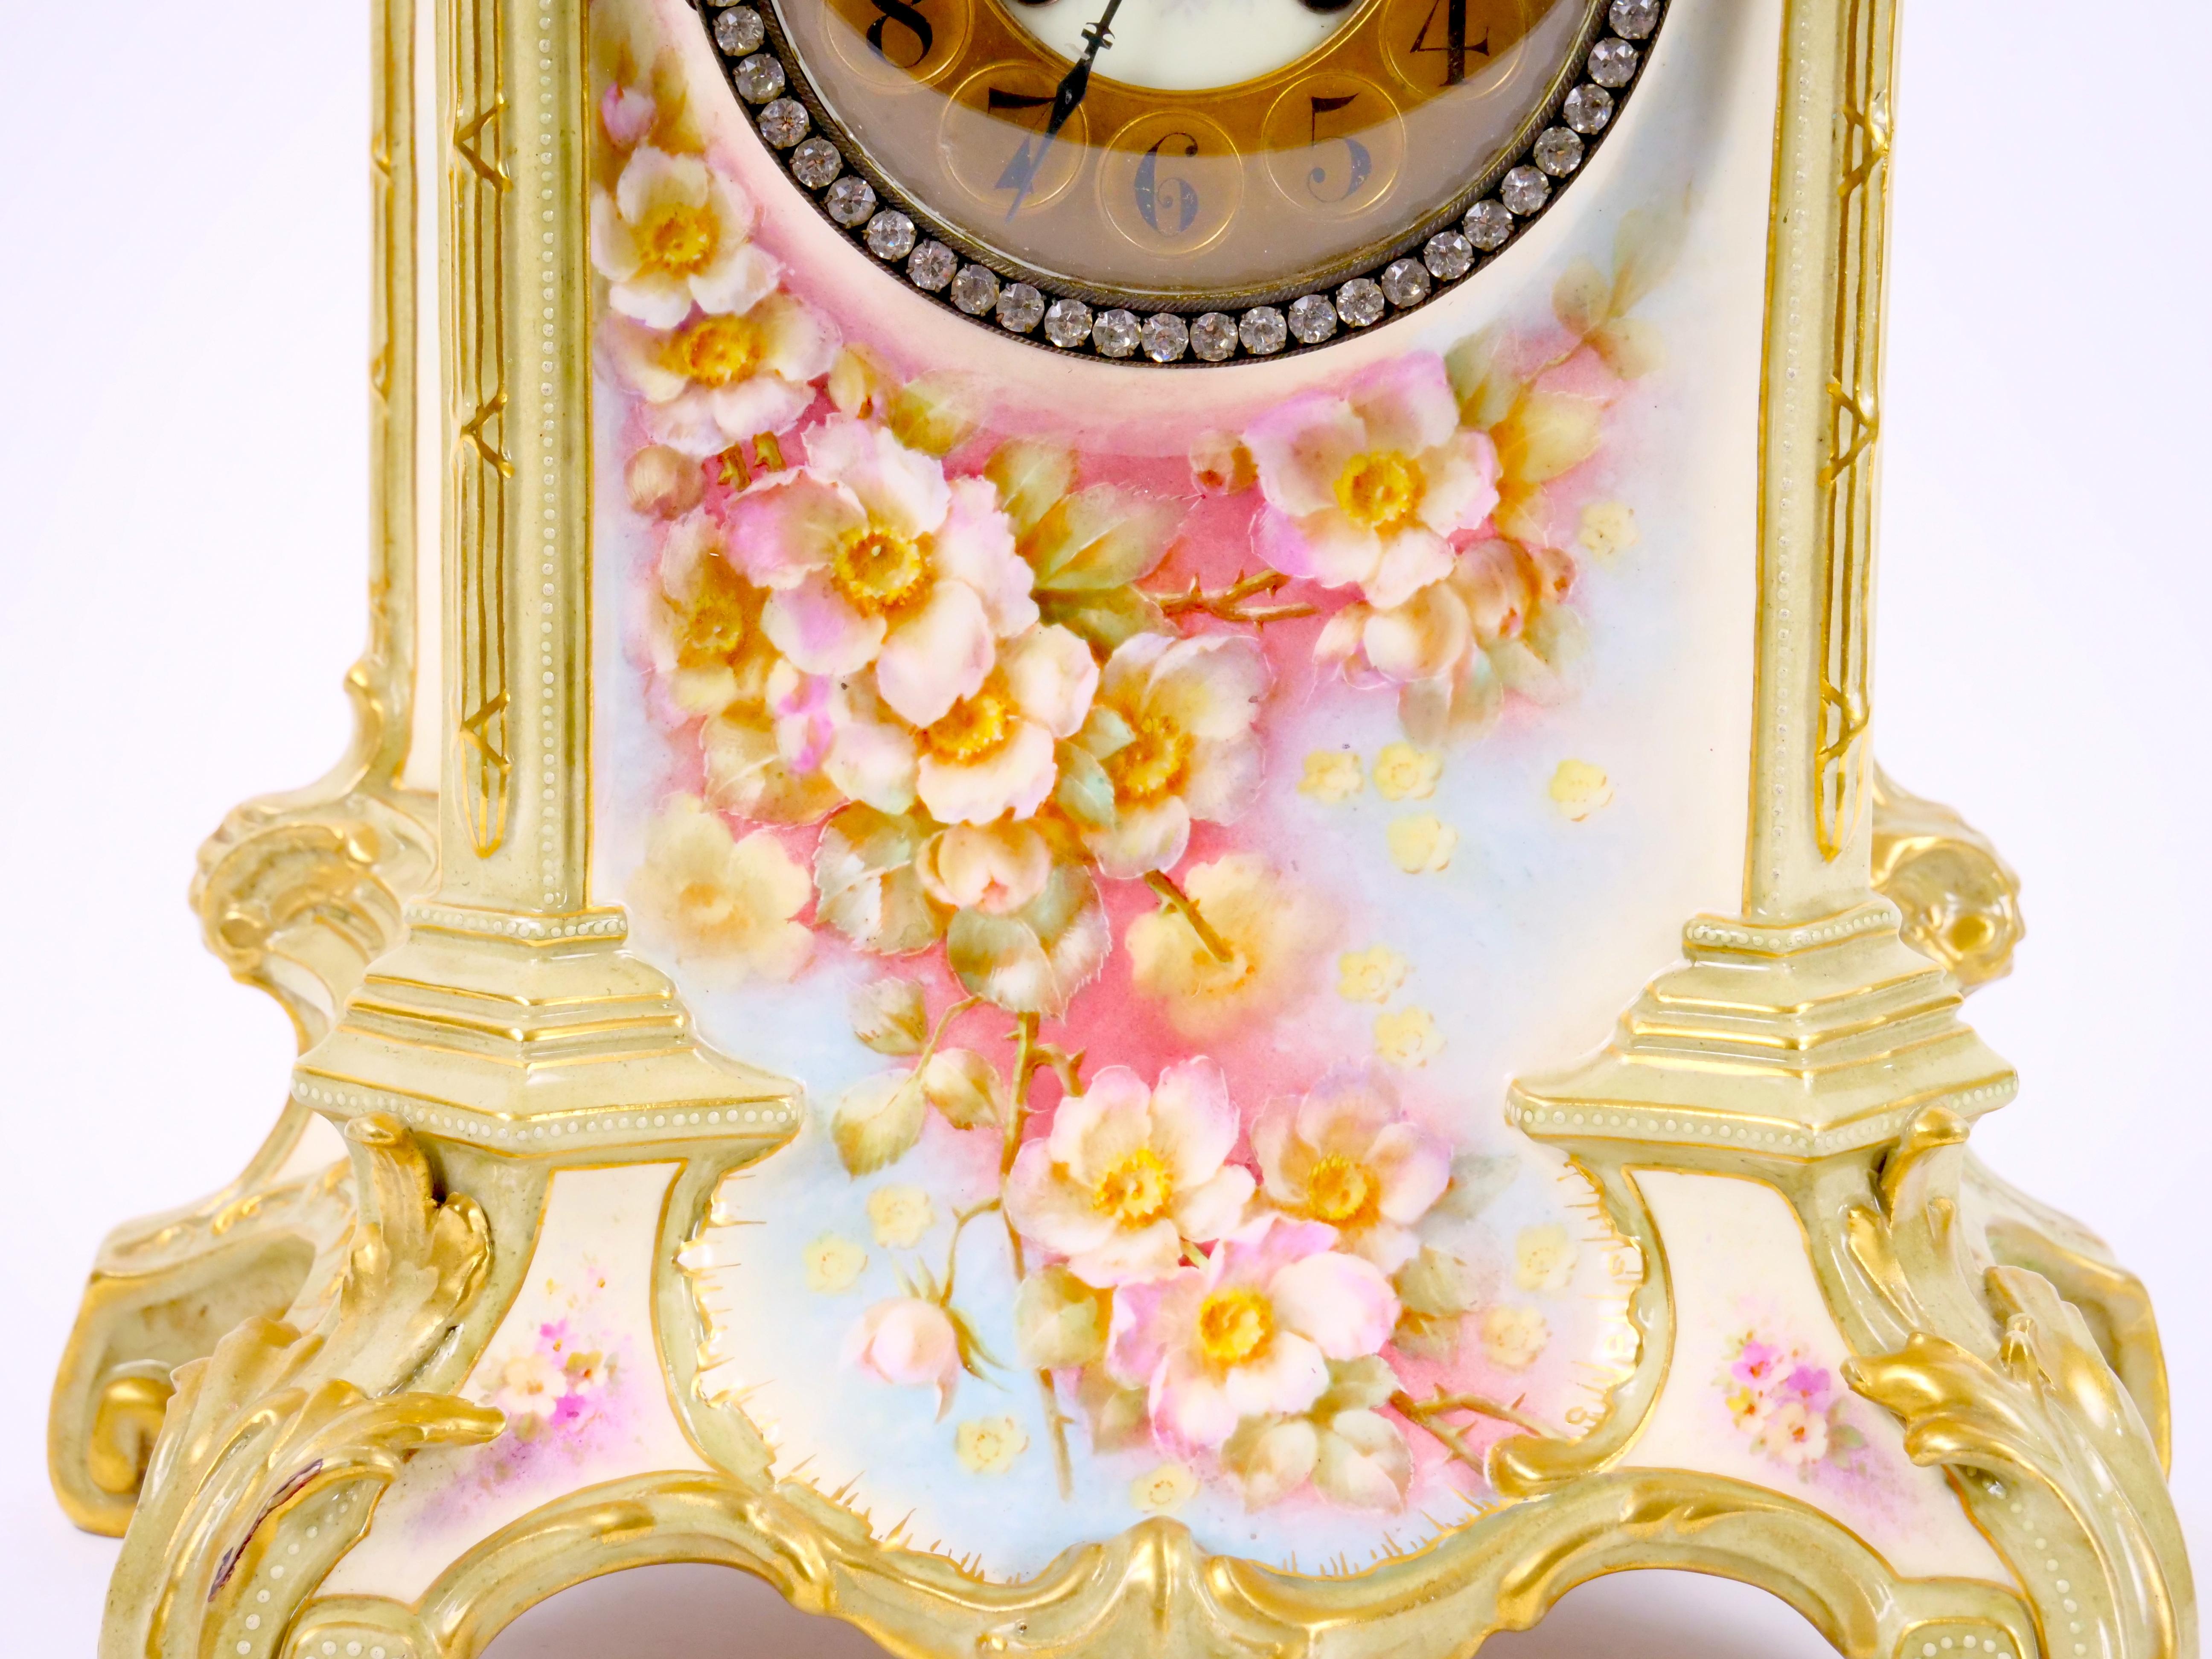 Gold 19th Century French Hand Painted/Gilt Decorated Porcelain Mantel Clock